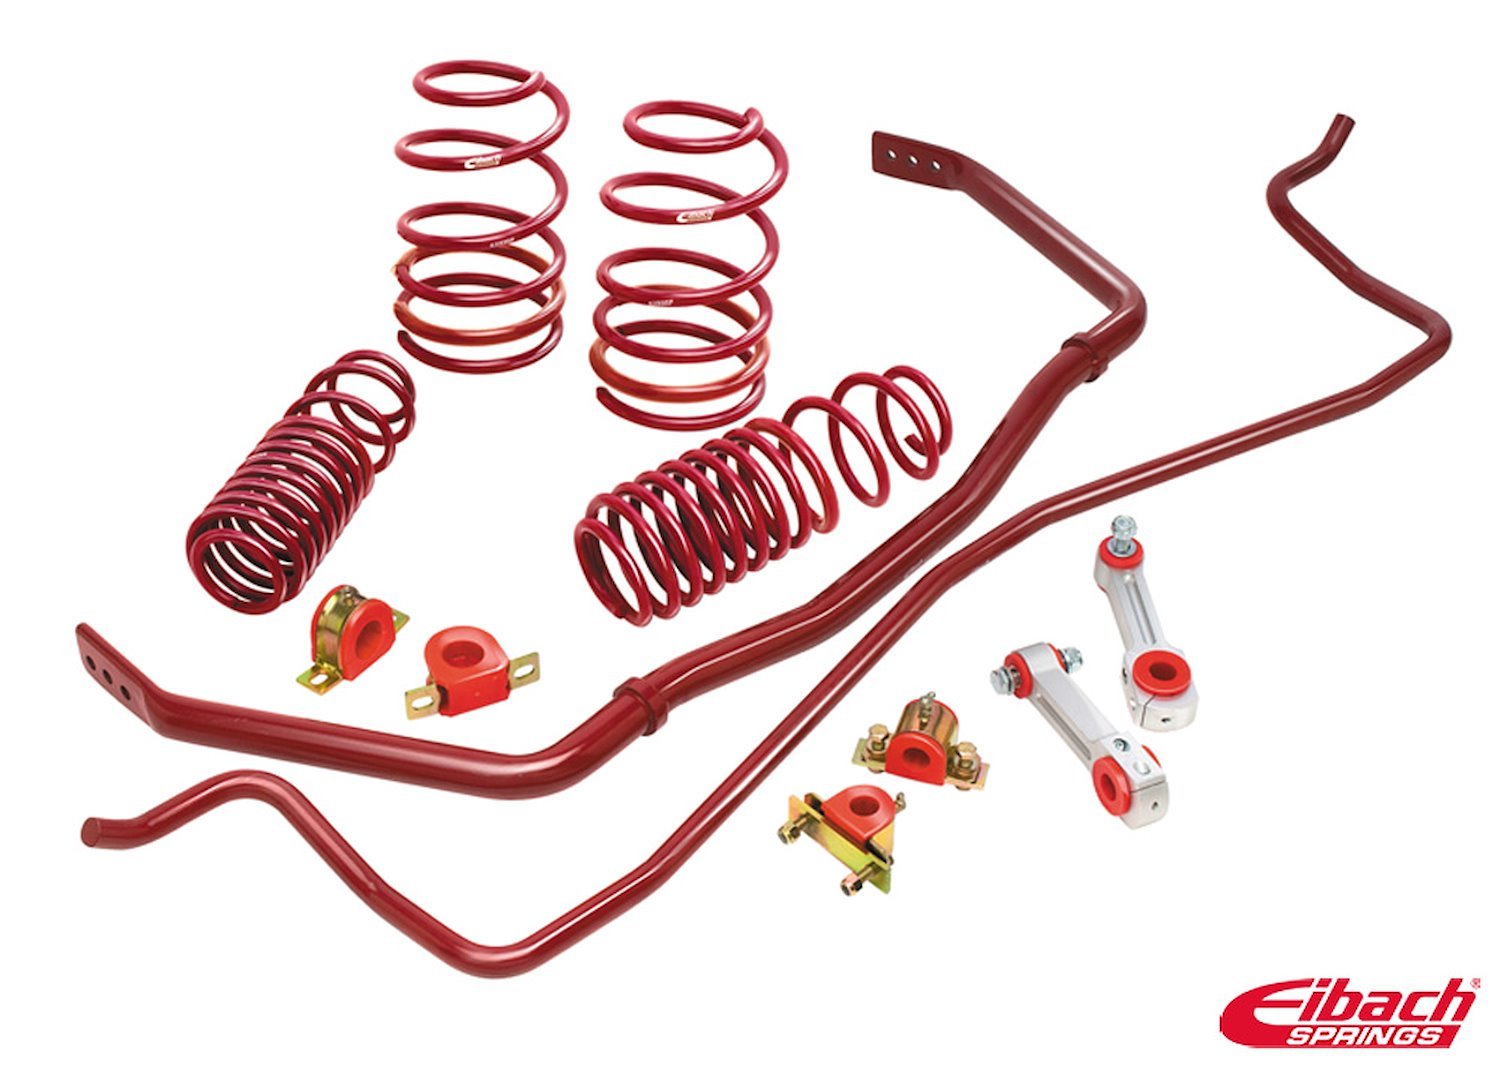 4.1035.881 Sport-Plus Suspension System 1994-04 Mustang V8 Coupe